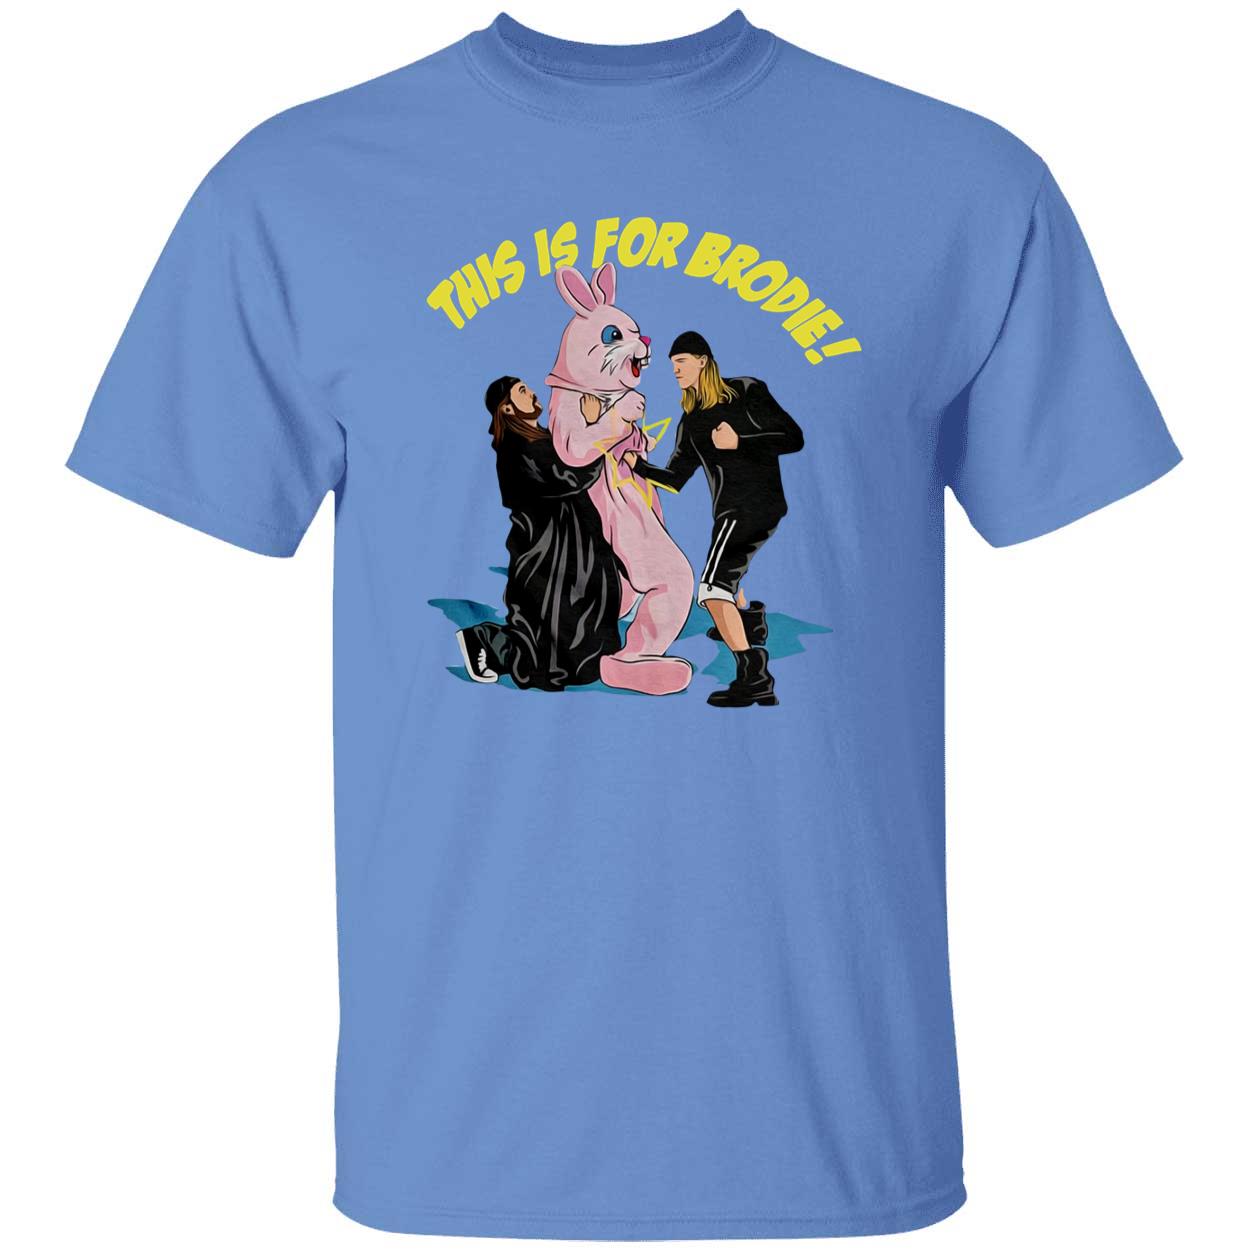 This Is For Brodie Tee Shirt Easter Kevin Smith The Chivery Merch Shirt